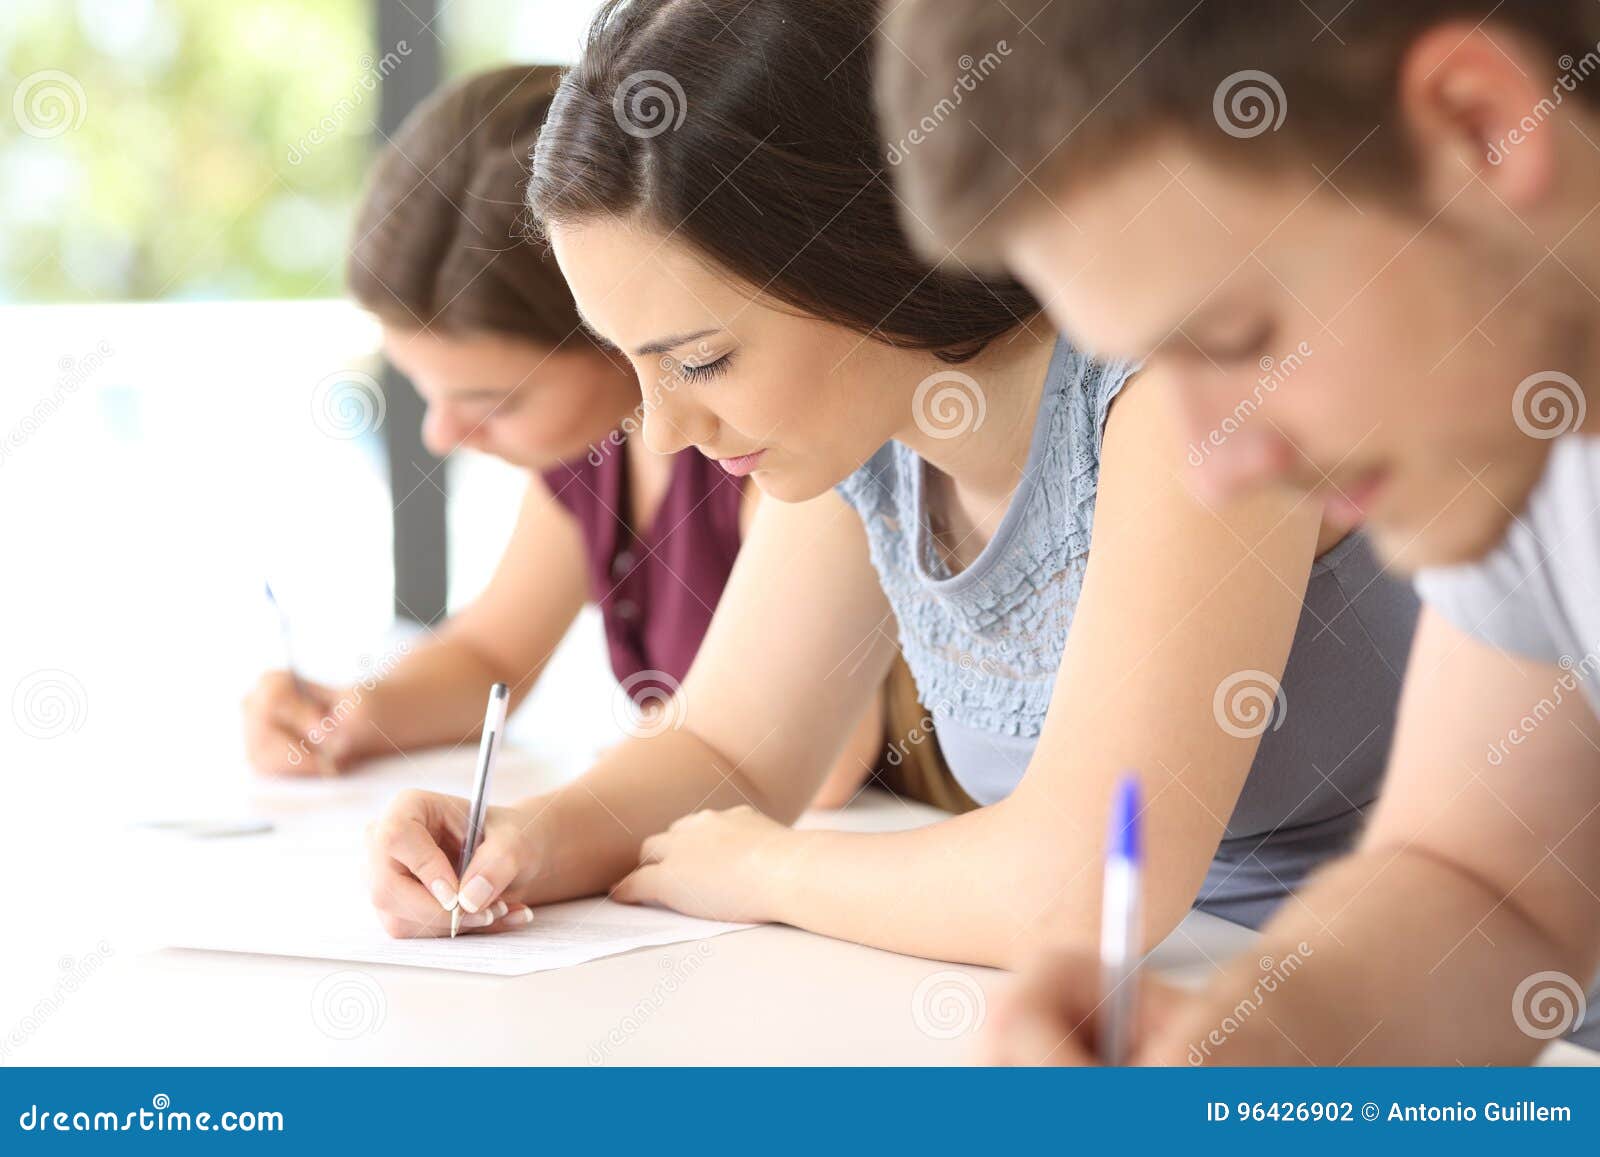 students doing an exam in a classroom